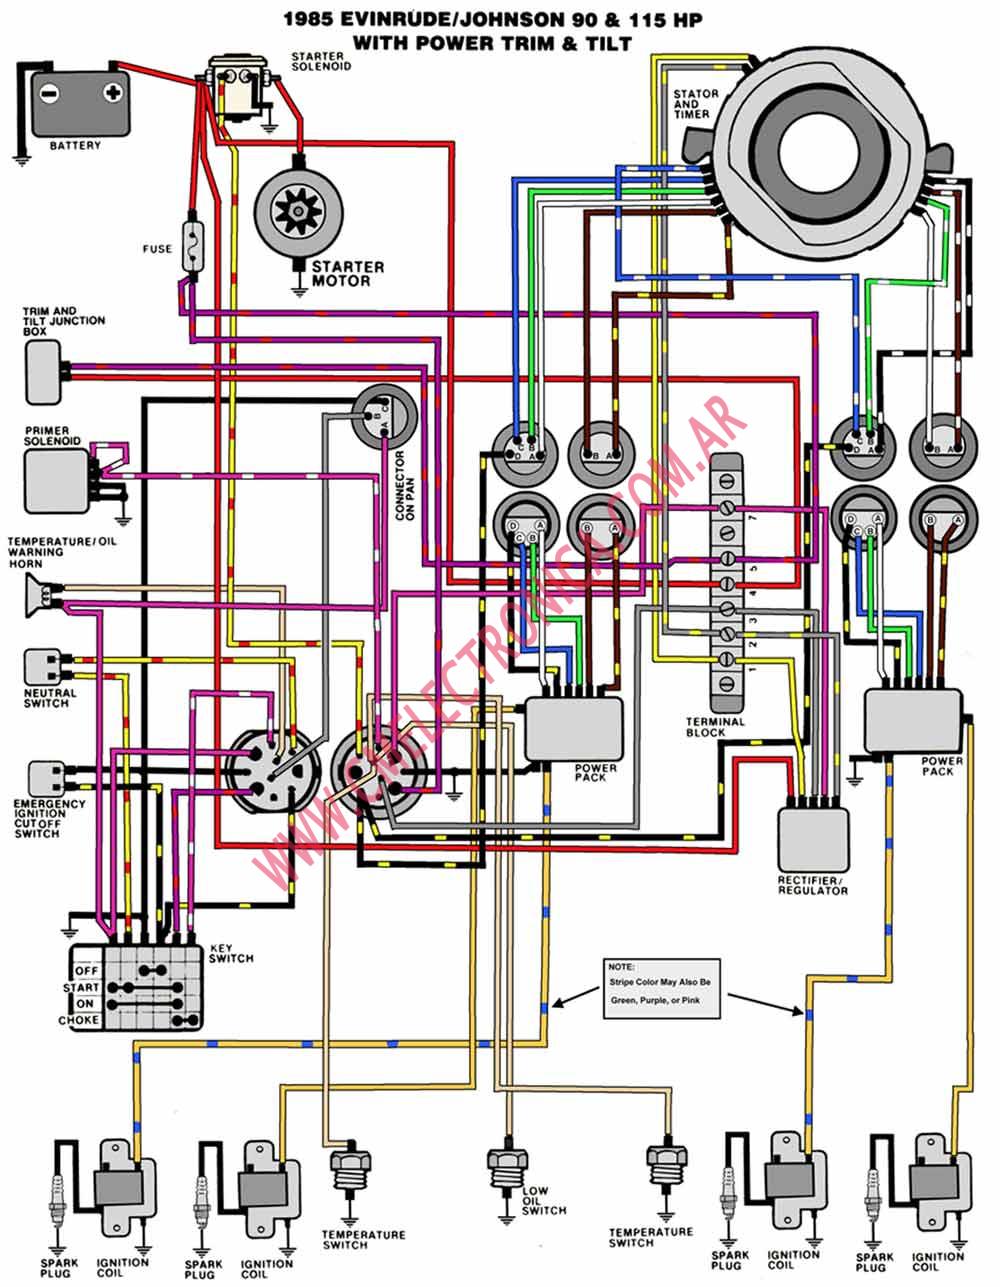 1974 chrysler 75hp outboard wiring diagram